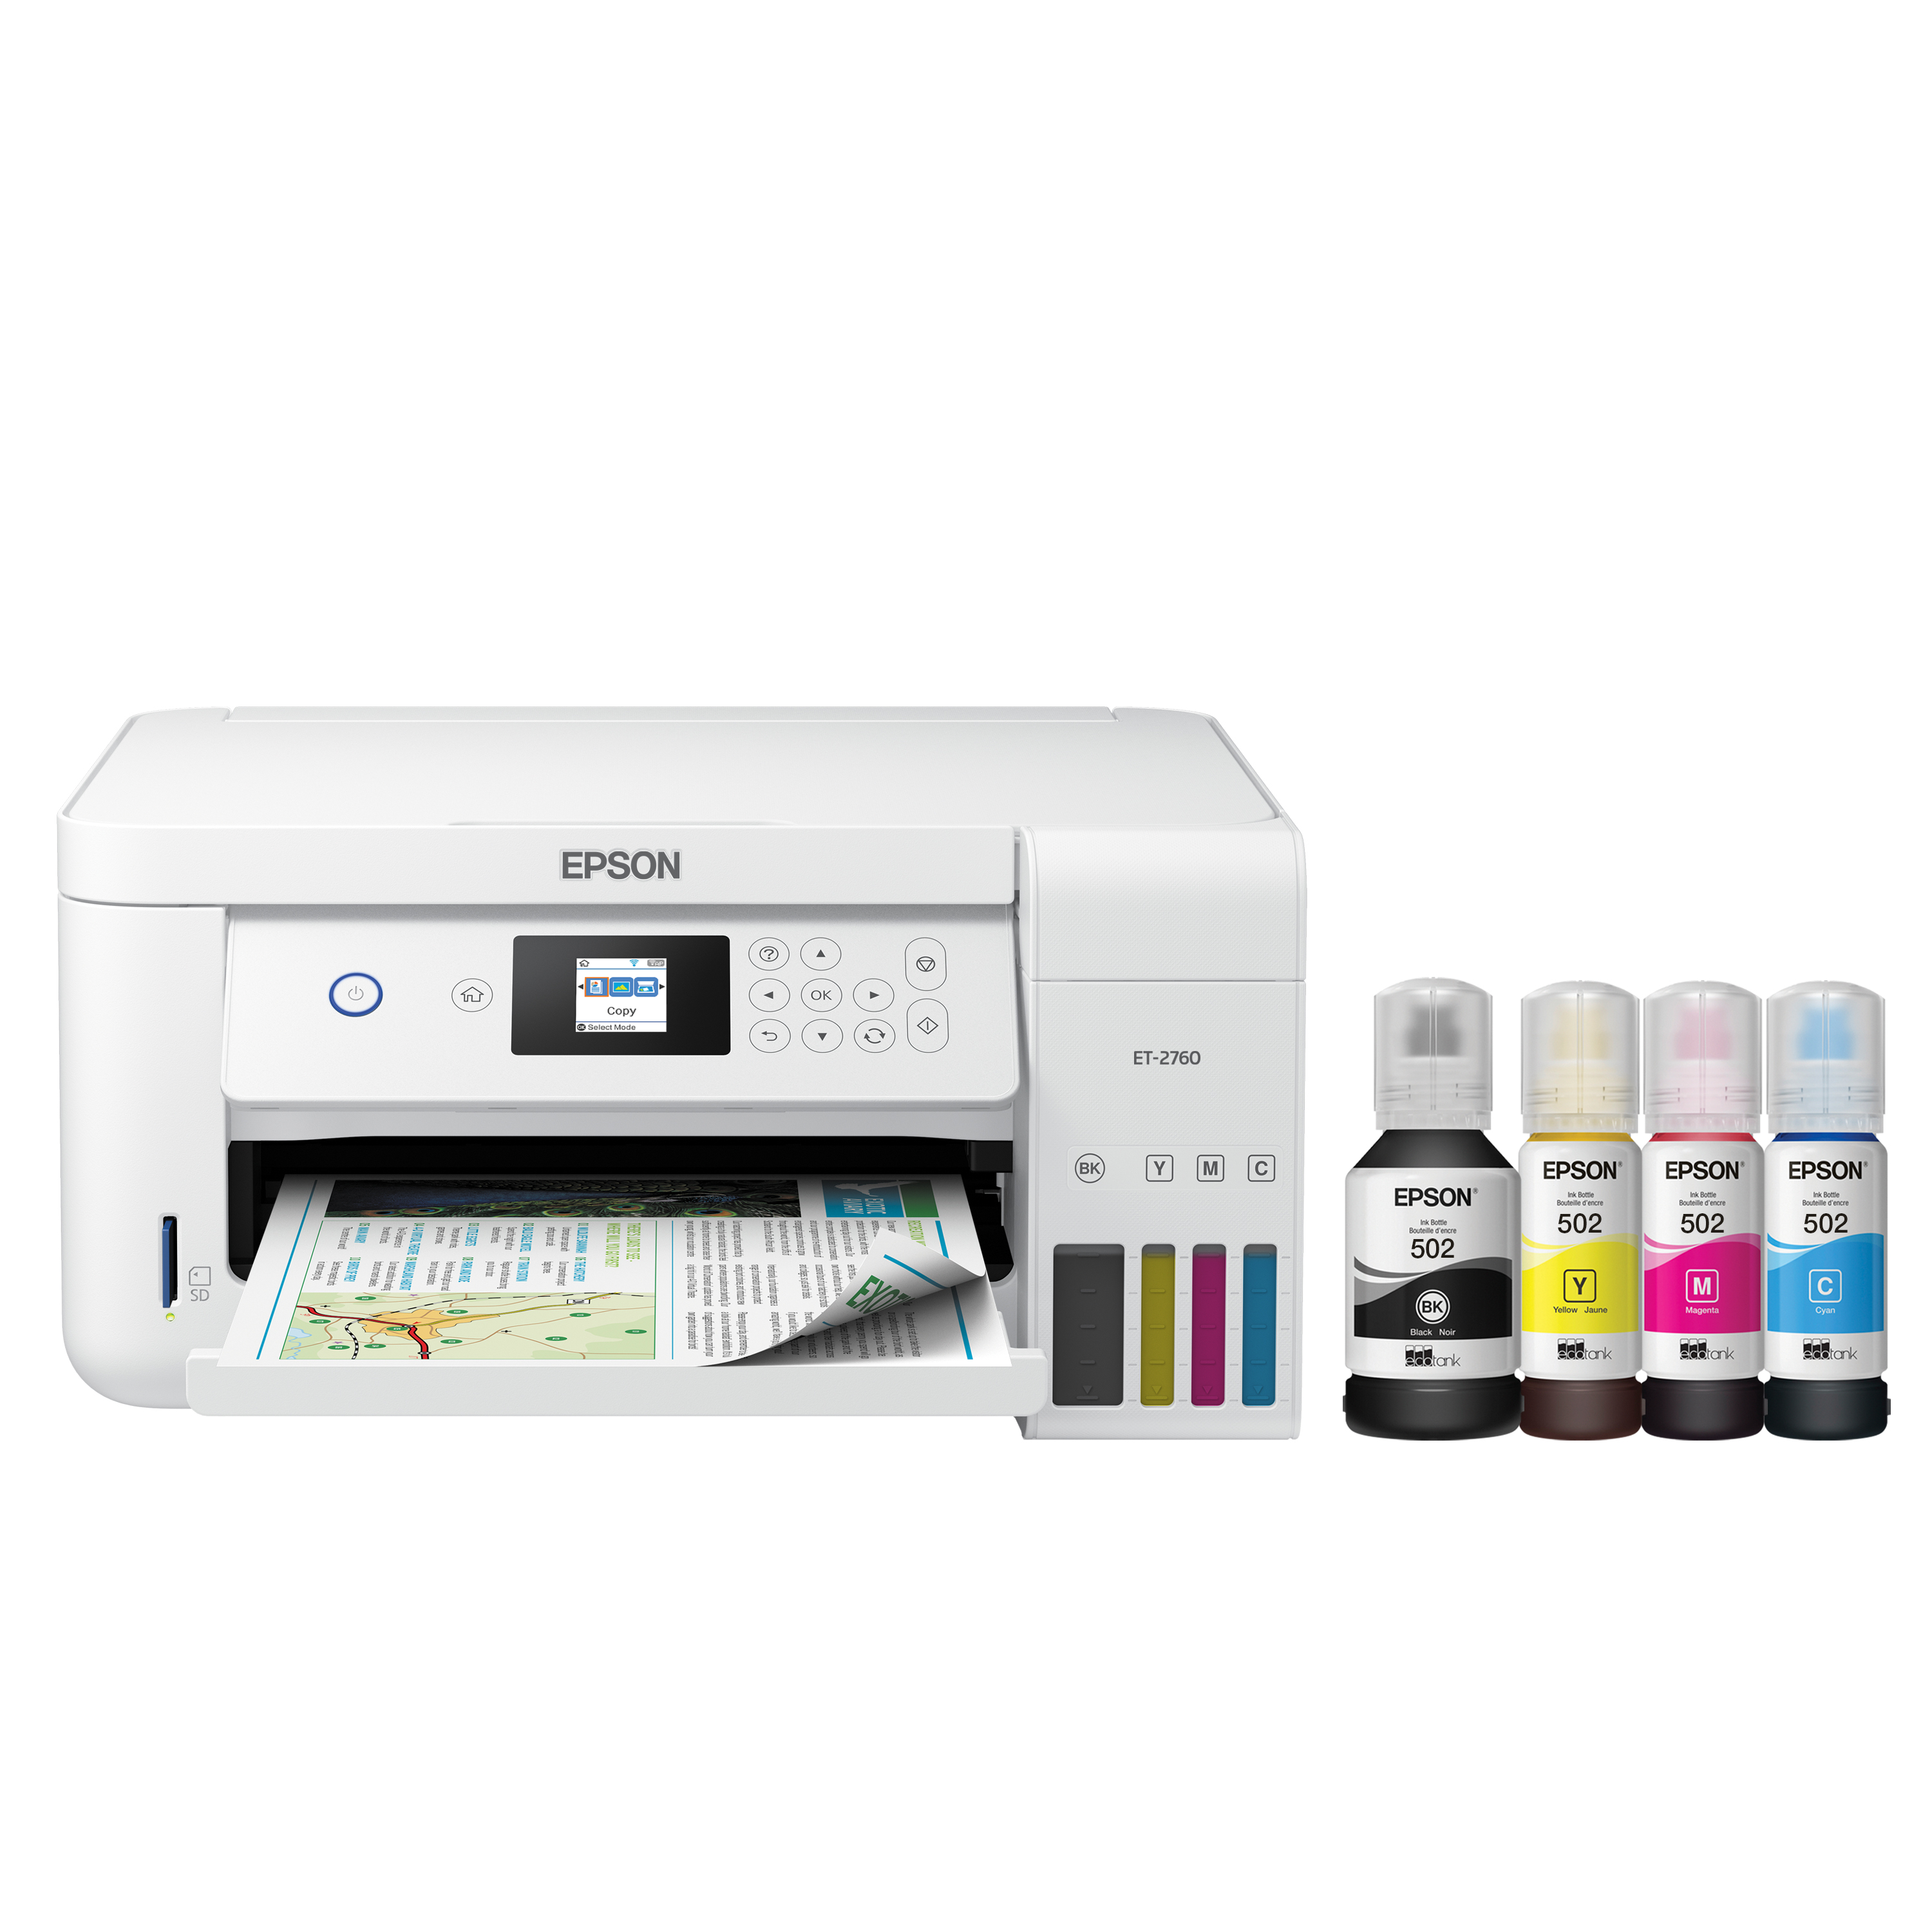 Epson EcoTank ET-2760 Wireless Color All-in-One Cartridge-Free Supertank Printer with Scanner and Copier - image 1 of 8